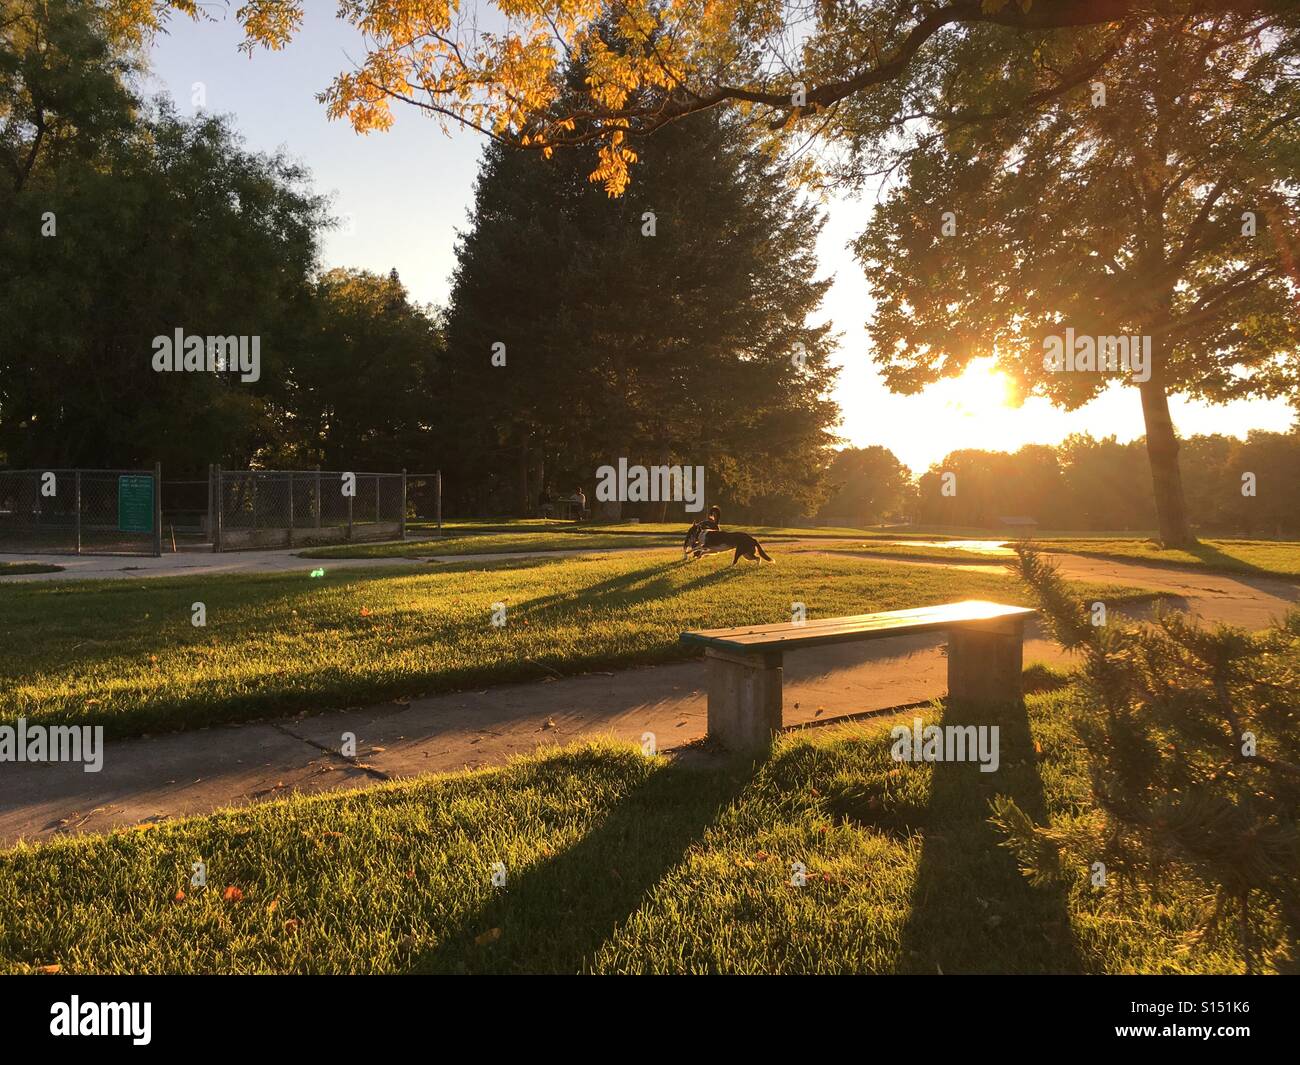 A golden park bench during magic hour with dogs playing in the background. Stock Photo